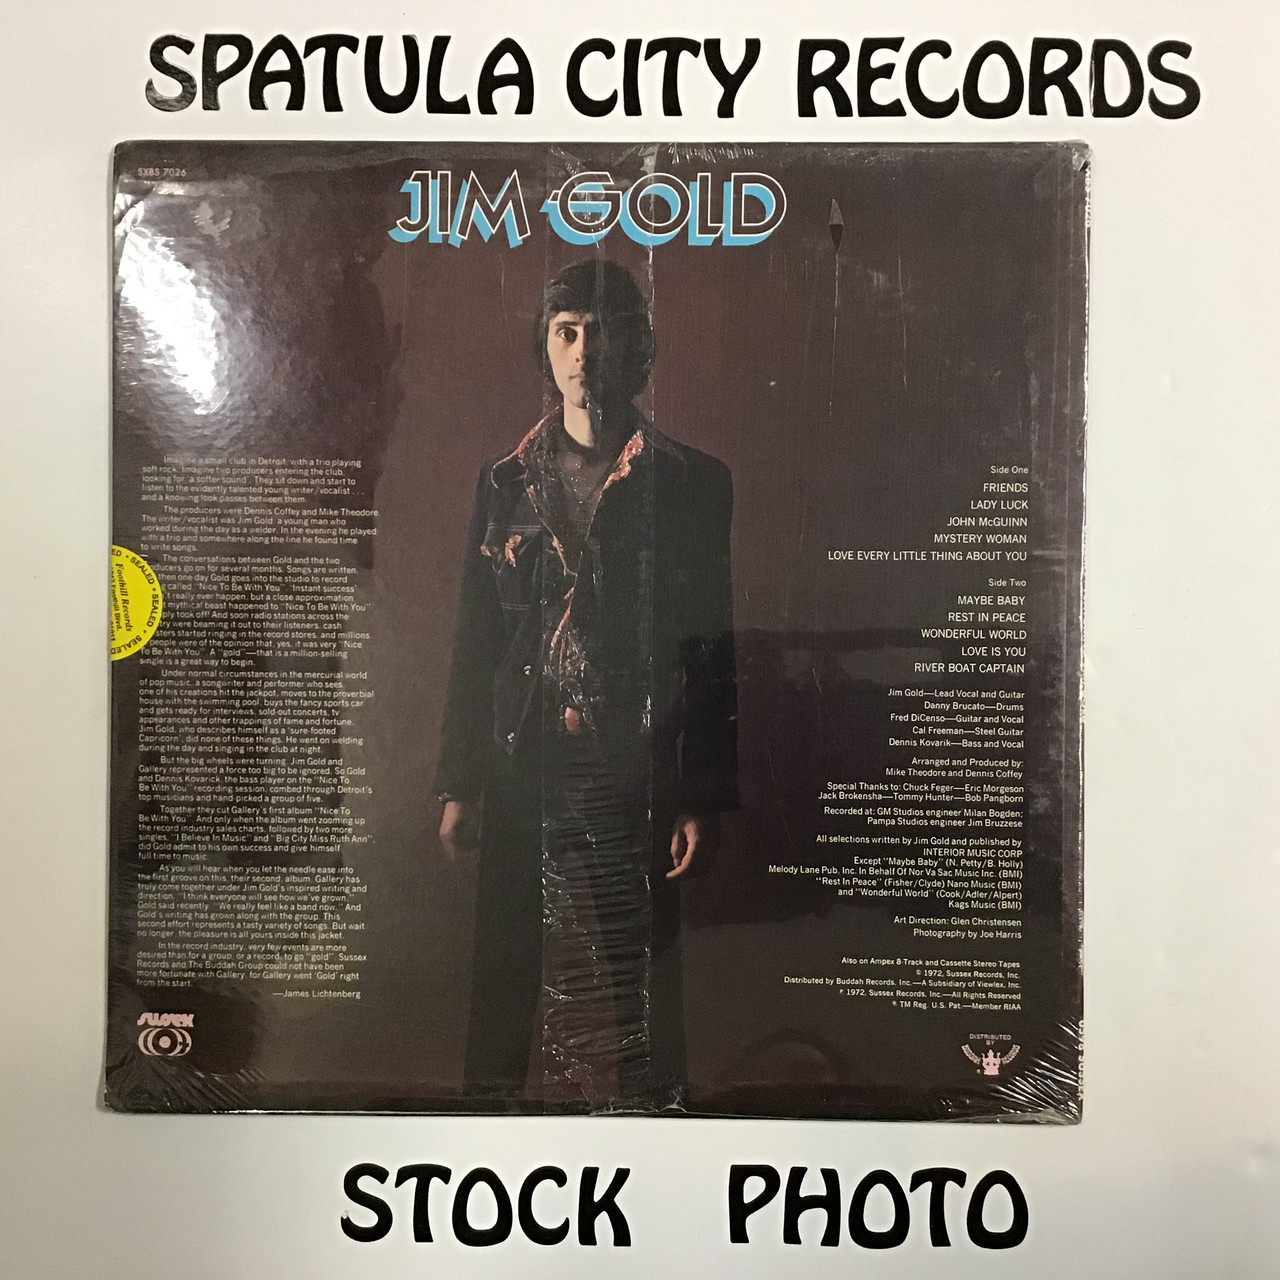 Gallery featuring Jim Gold - Gallery featuring Jim Gold - SEALED - vinyl record LP